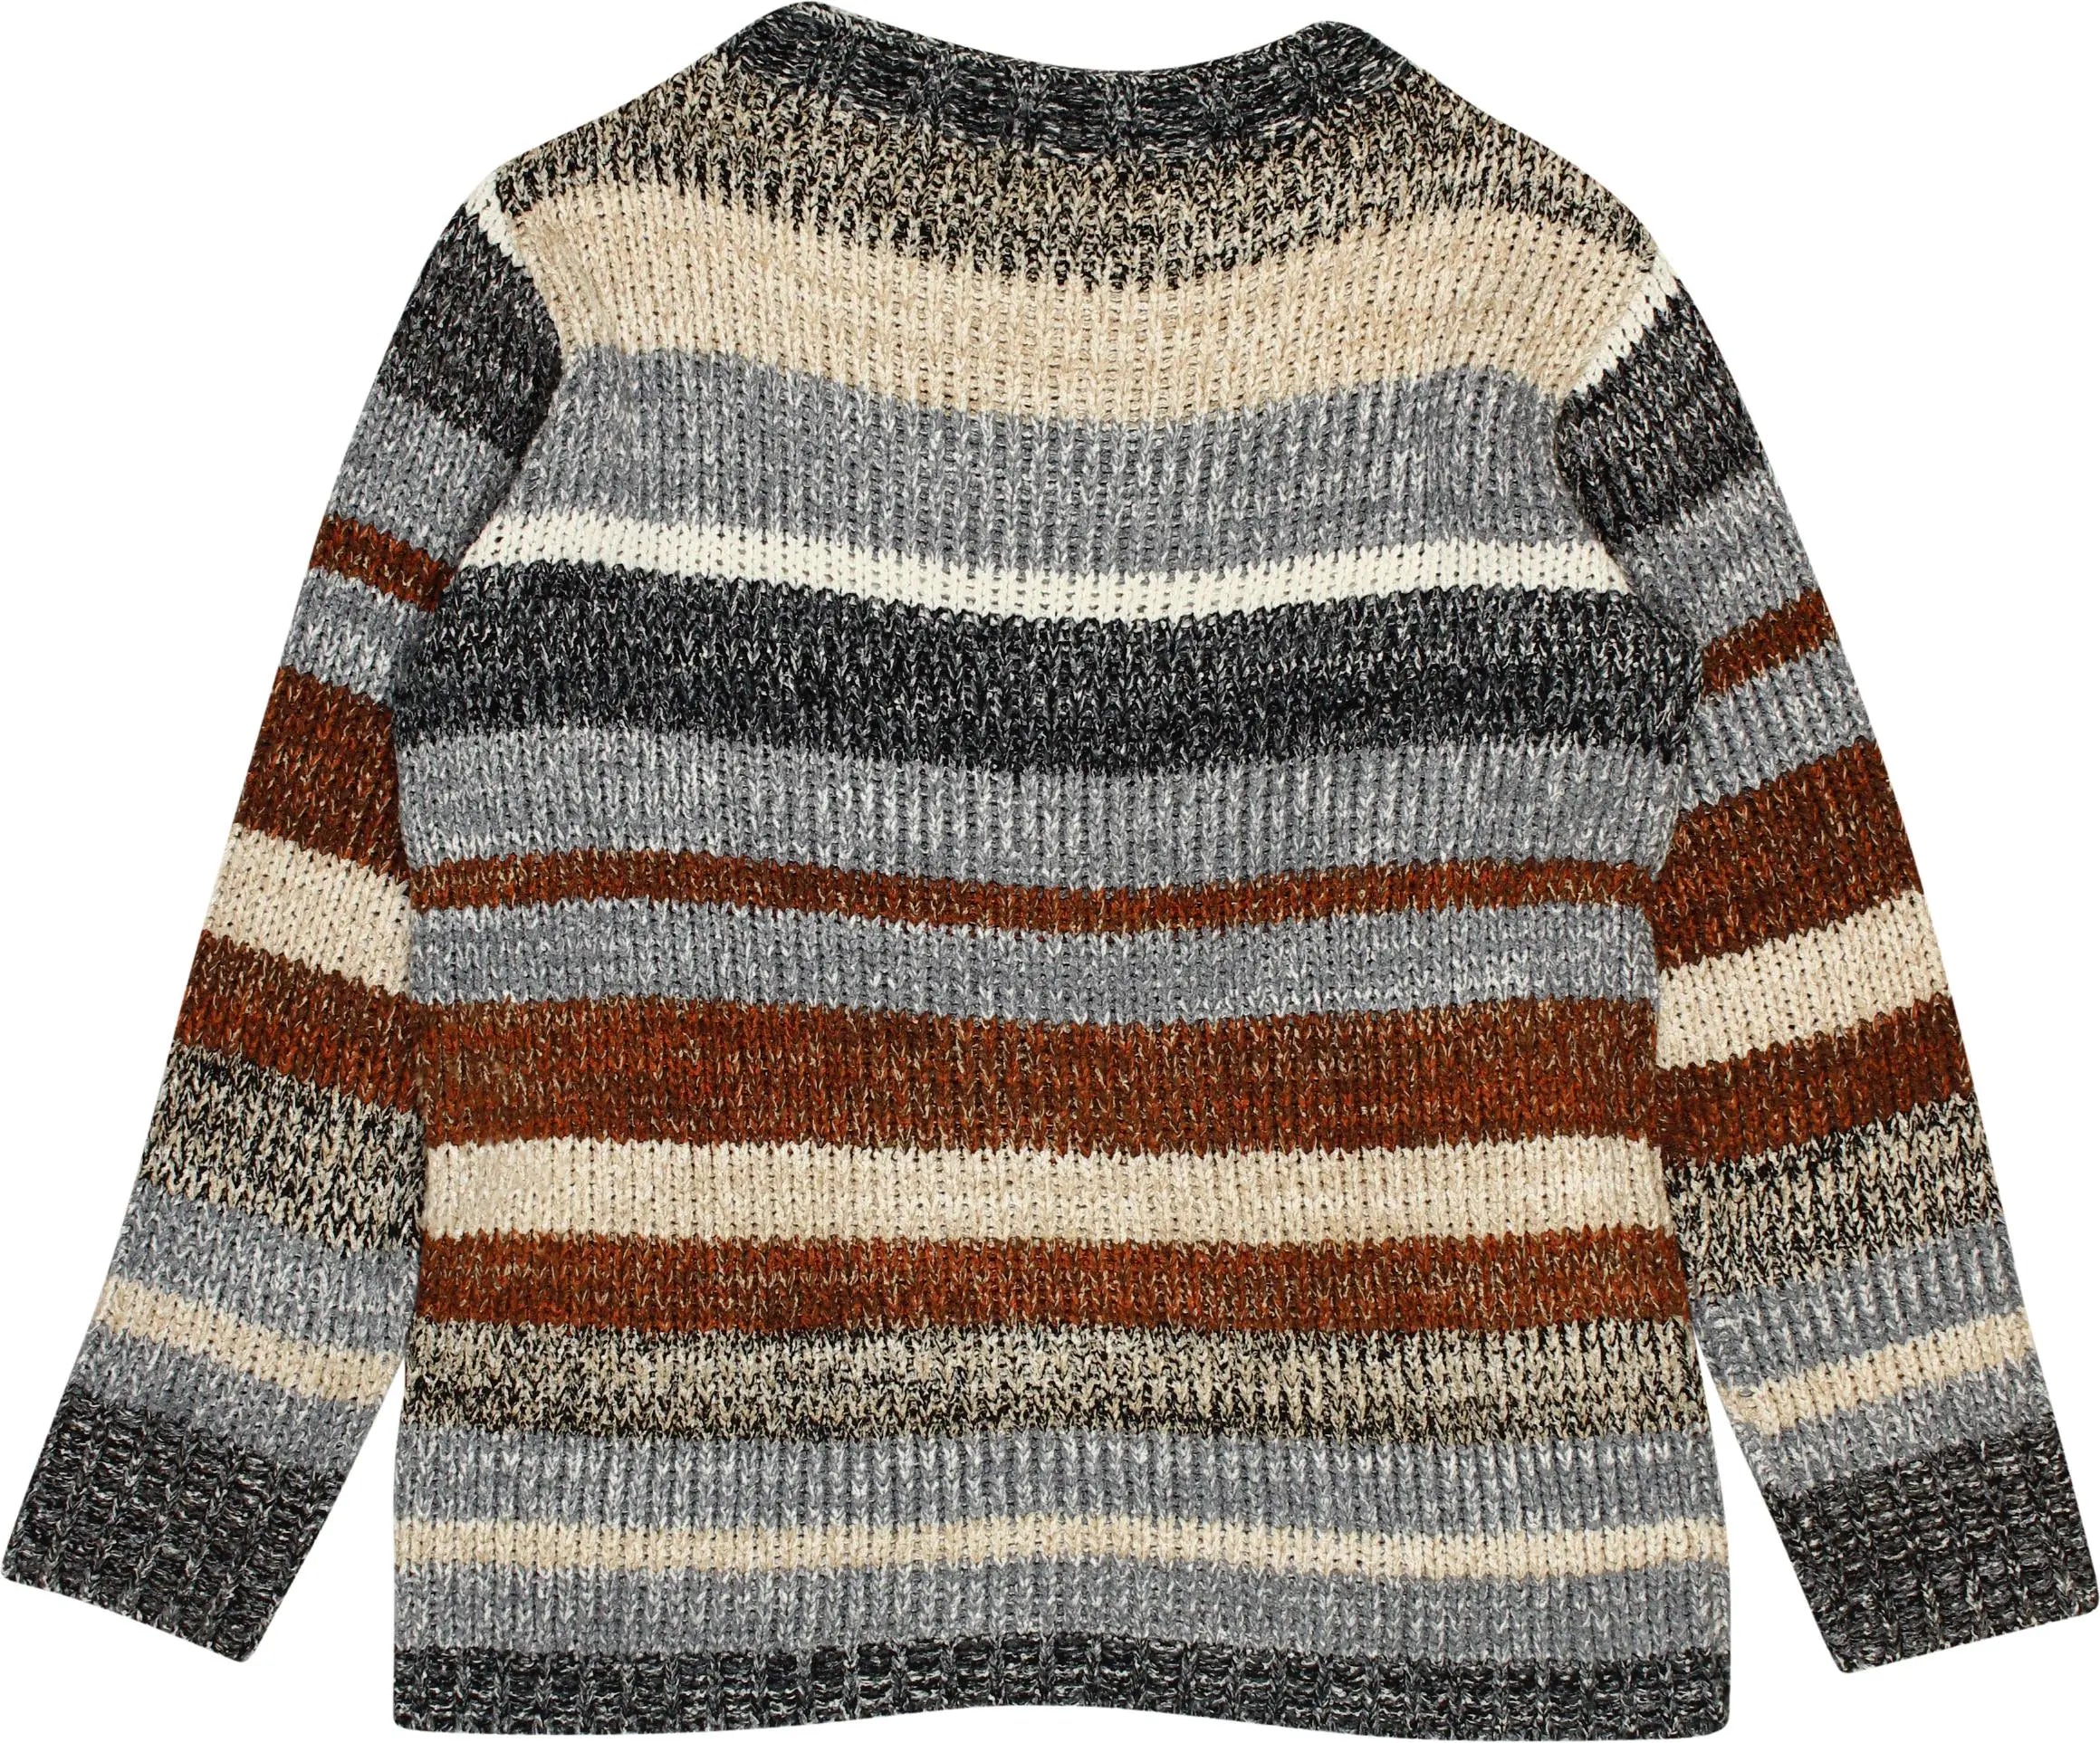 Jörg Peterson - Colourful Knitted Jumper- ThriftTale.com - Vintage and second handclothing